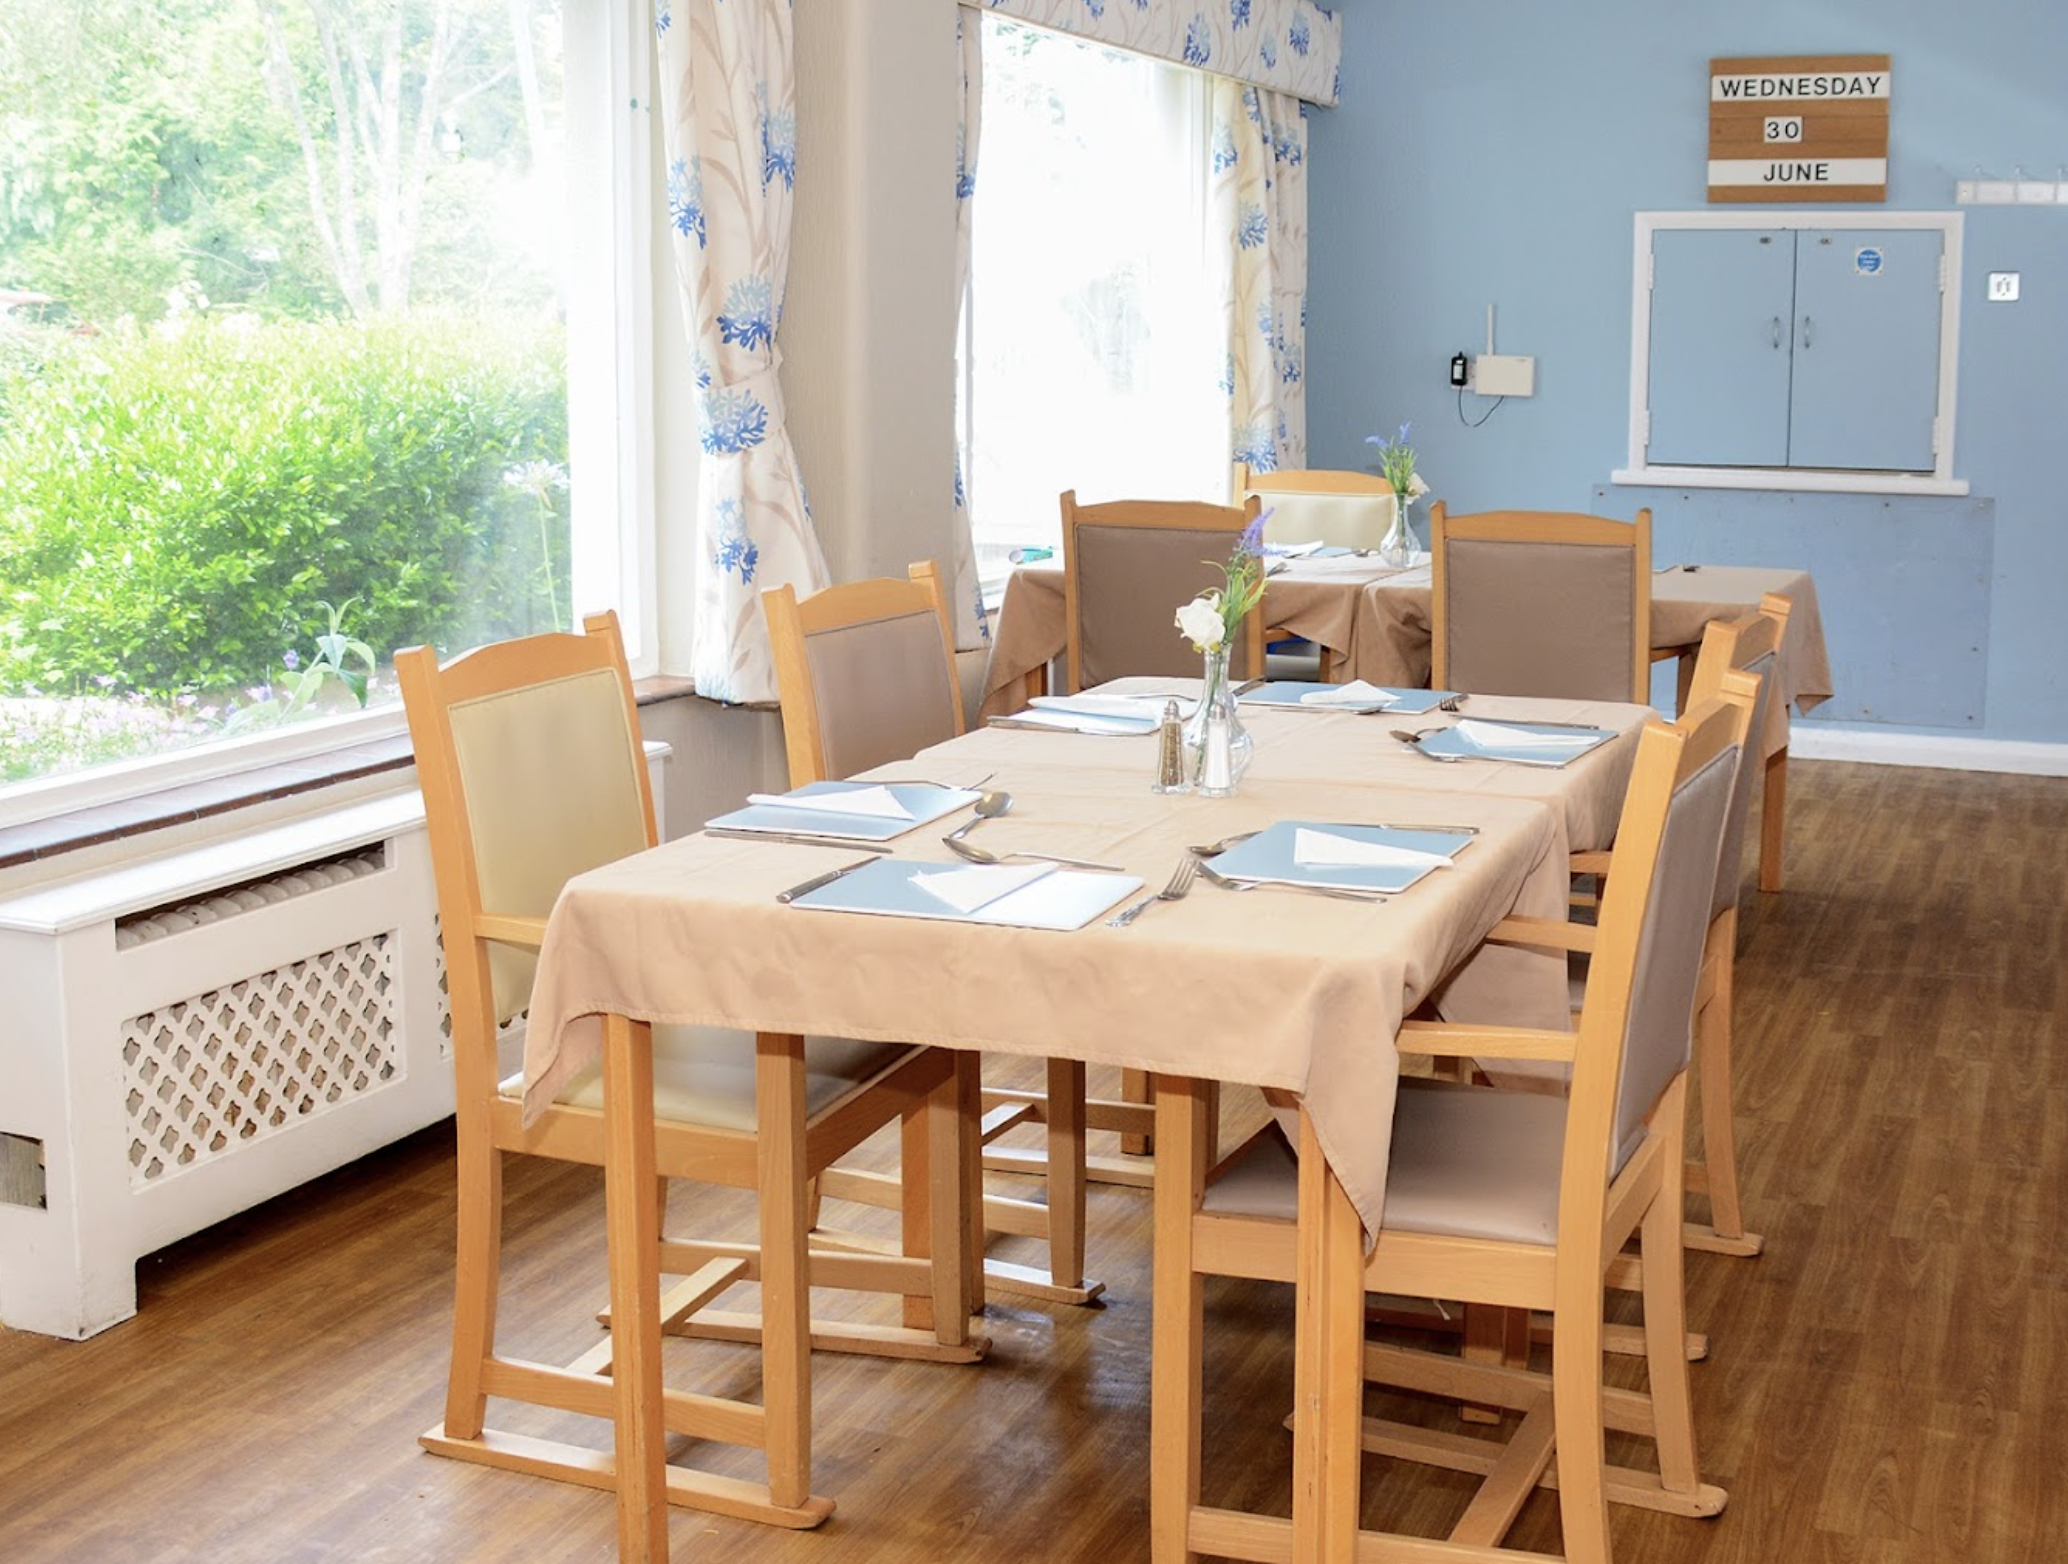 Dining room of Dorset House care home in Poole, Hampshire